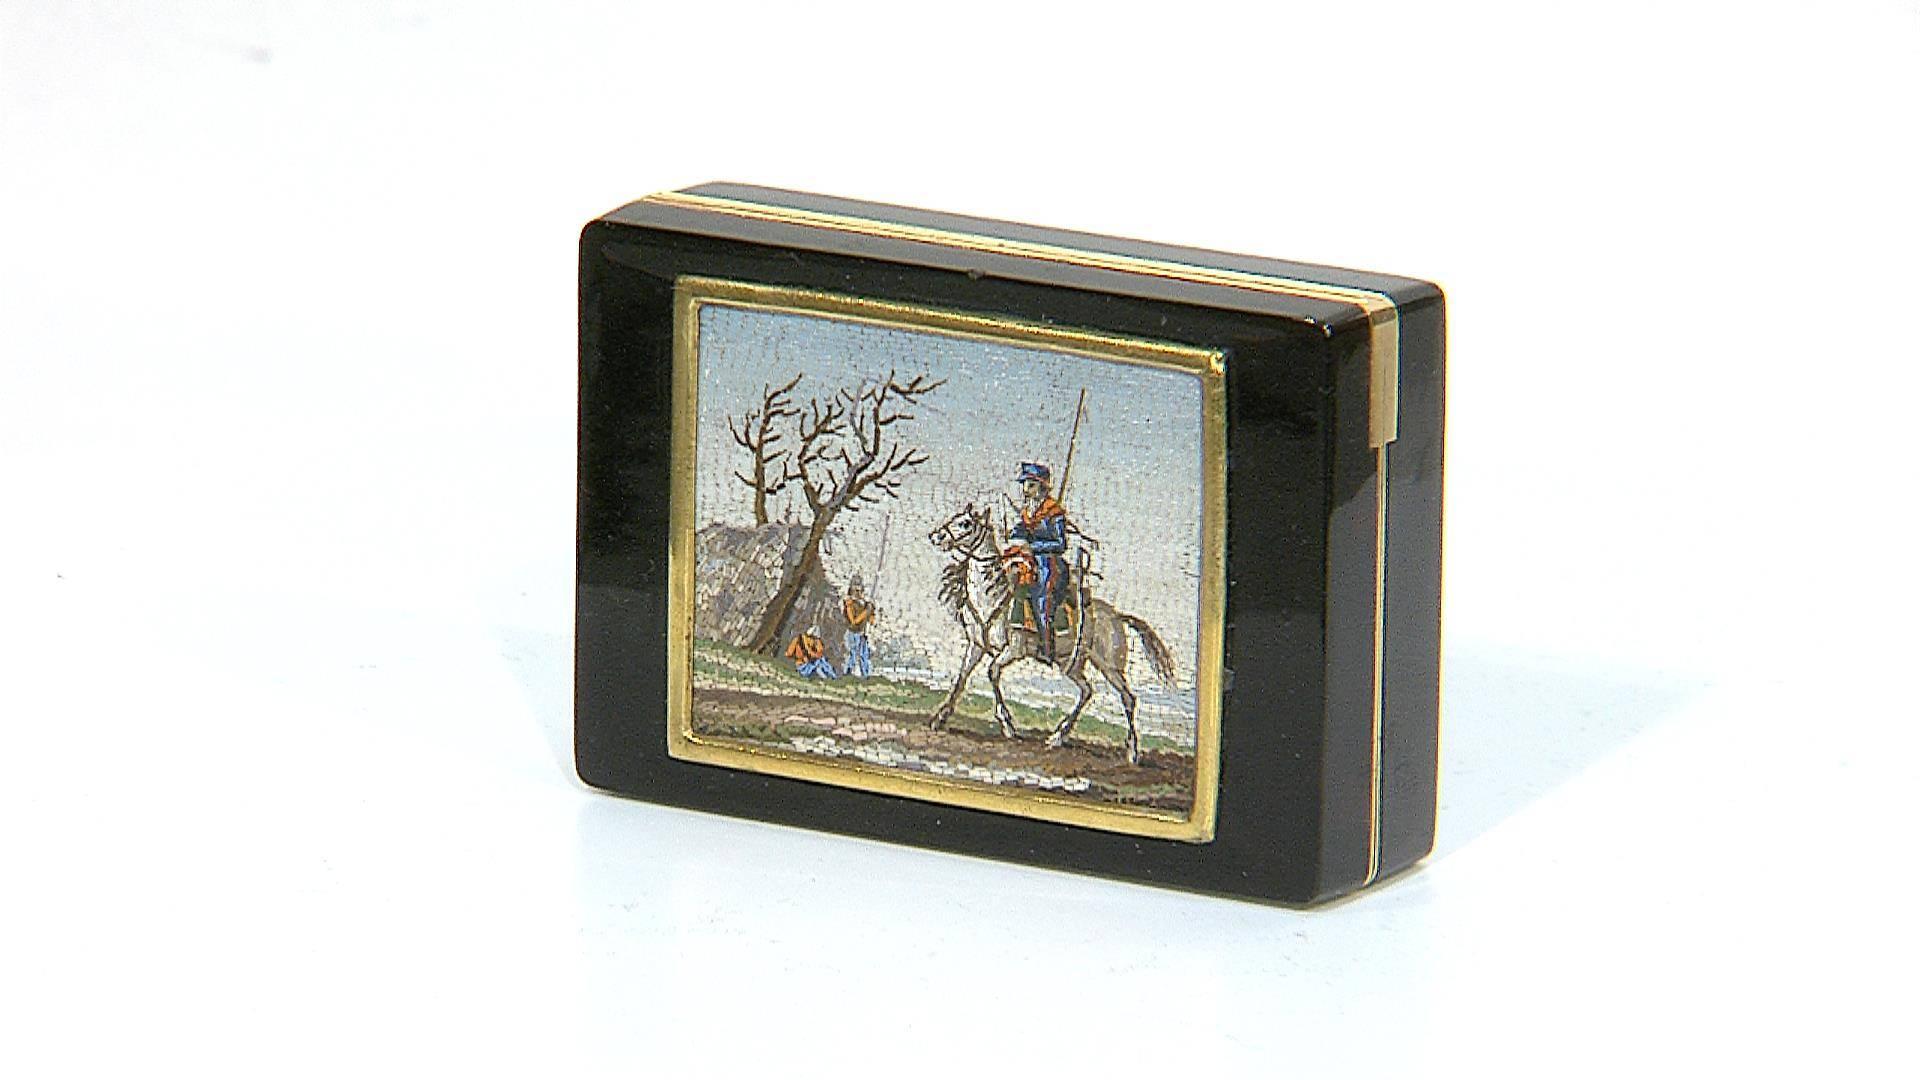 Snuff box in tortoise shell, with refined gold framing.
Micromosaic by Michelangelo Barberi,
St Petersburg, early 19th century.

The micromosaic depicts an officer on horseback meeting soldiers in their winter quarters, an unusual scene for